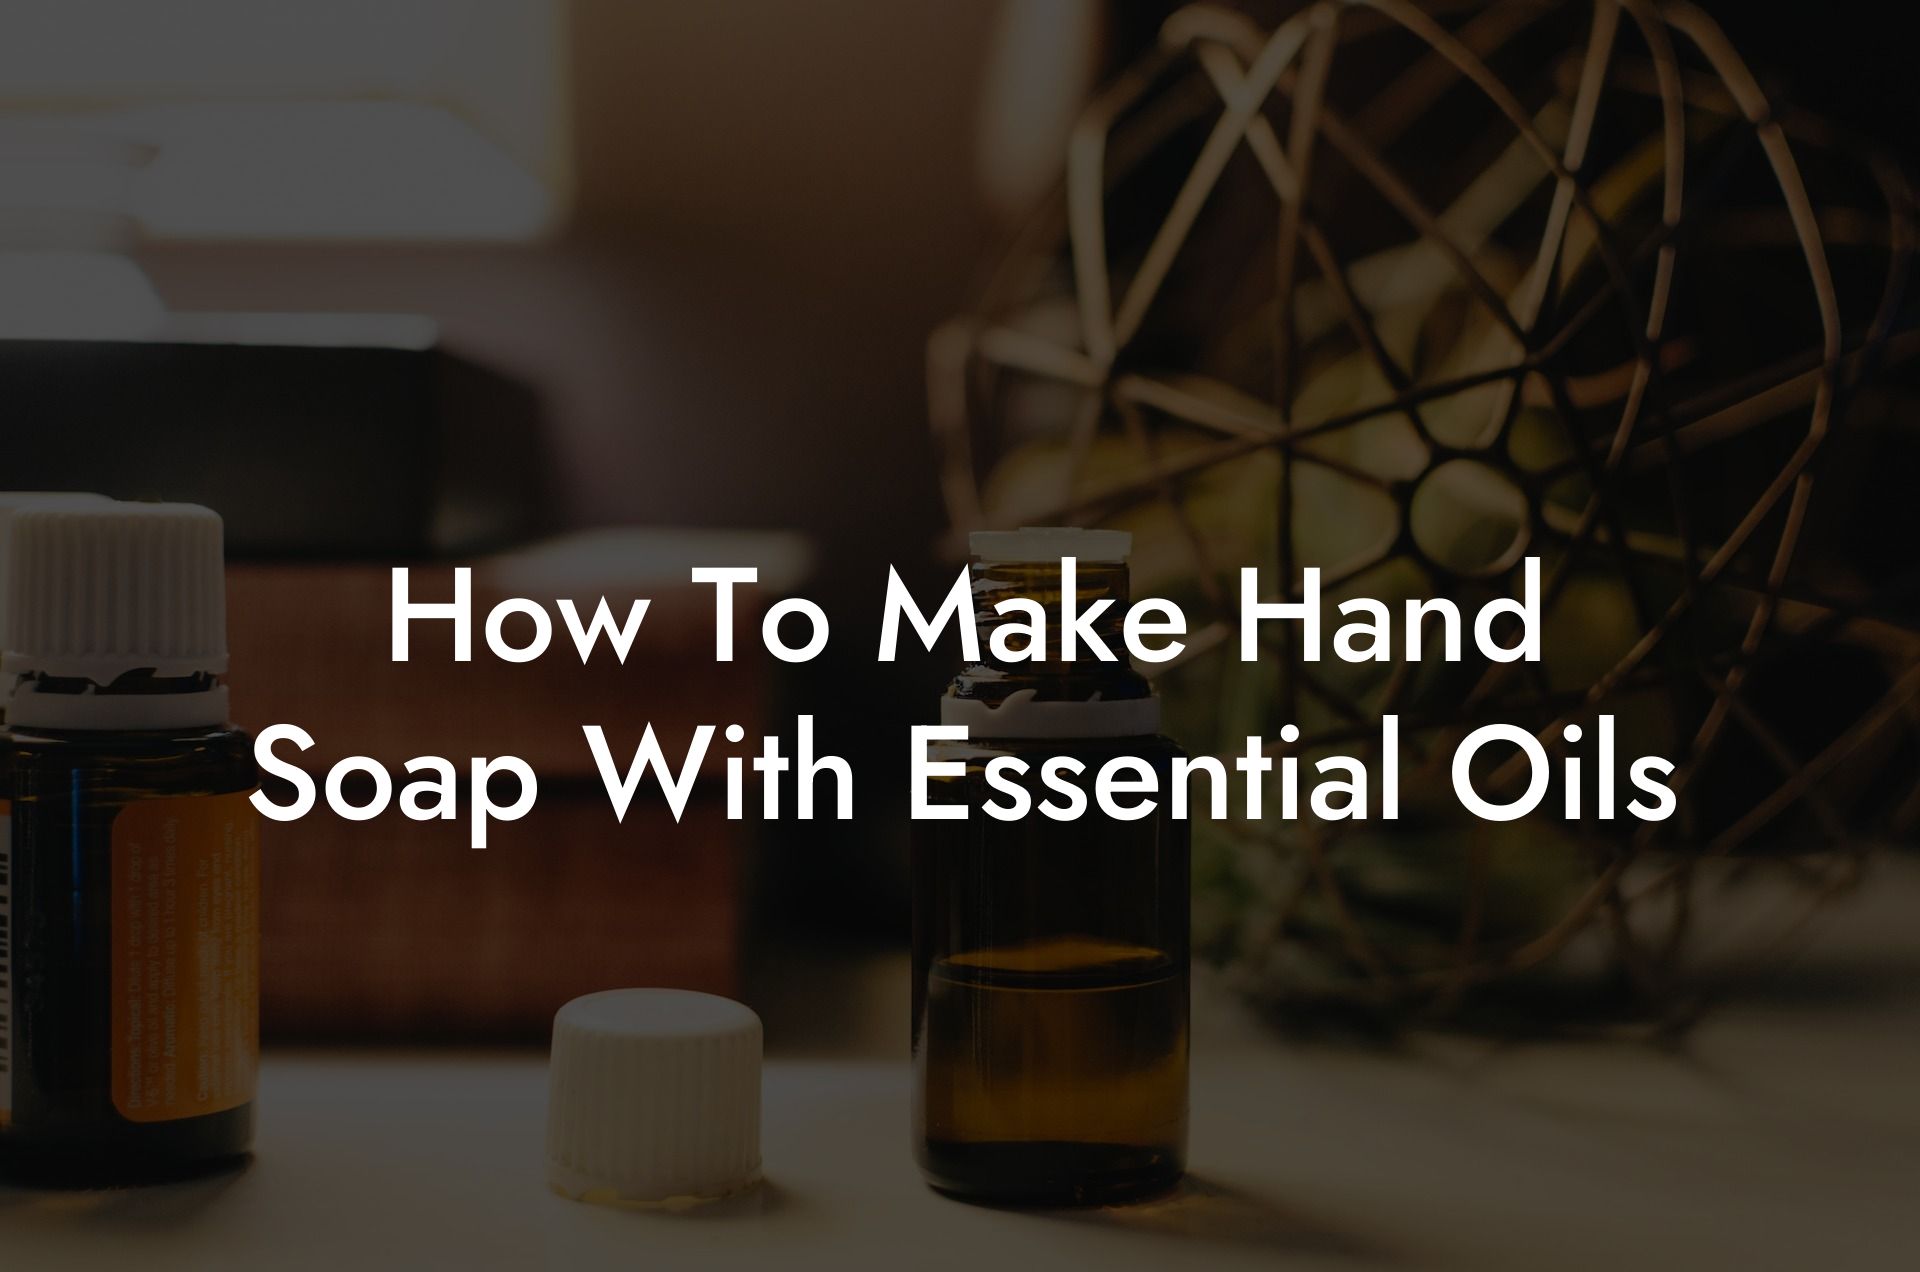 How To Make Hand Soap With Essential Oils